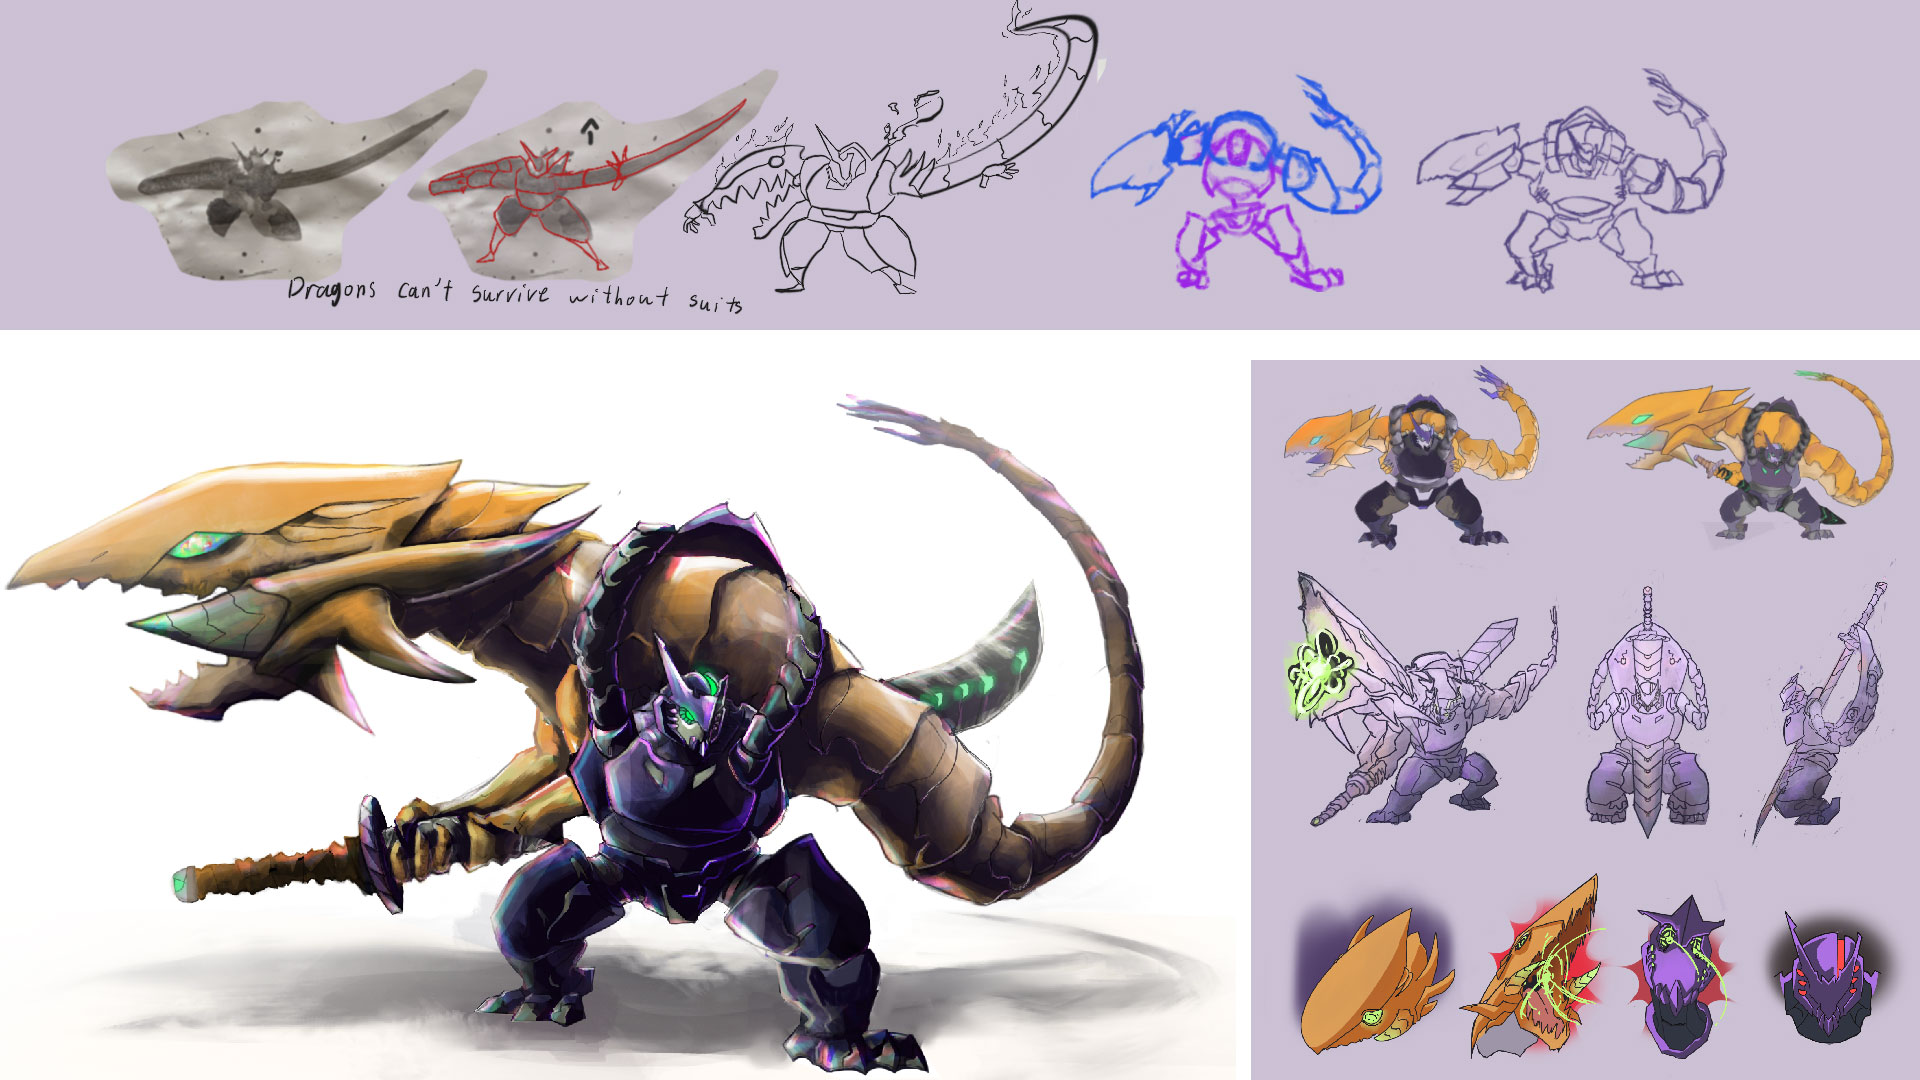 The bottom left image is of the Dragon-mech who appears as if there is an orange Lyndworm growing out of its back. The Lyndworm is a snake like dragon with a giant head and arms holding a longsword with a curved tip. The mech is a stocky, thick limbed, purple-toned robot who carries the dragon like a backpack and uses the dragon as a stand-in for his arms. The sequence at the top of the page shows the progression from ink blot to first line art stage. The right-hand panel shows the rough coloured versions of first stage line art and final stage line art with the rows that follow showing poses and expressions. The top row poses are of the duo charging up a blast from the dragon’s mouth, and a front and side view of the deactivated mode for the robot without the dragon. The bottom four expressions are of the dragon in a sad and angry state, and for an enraged and depowered robot when the lights change from a neon and vibrant green to a basic red.